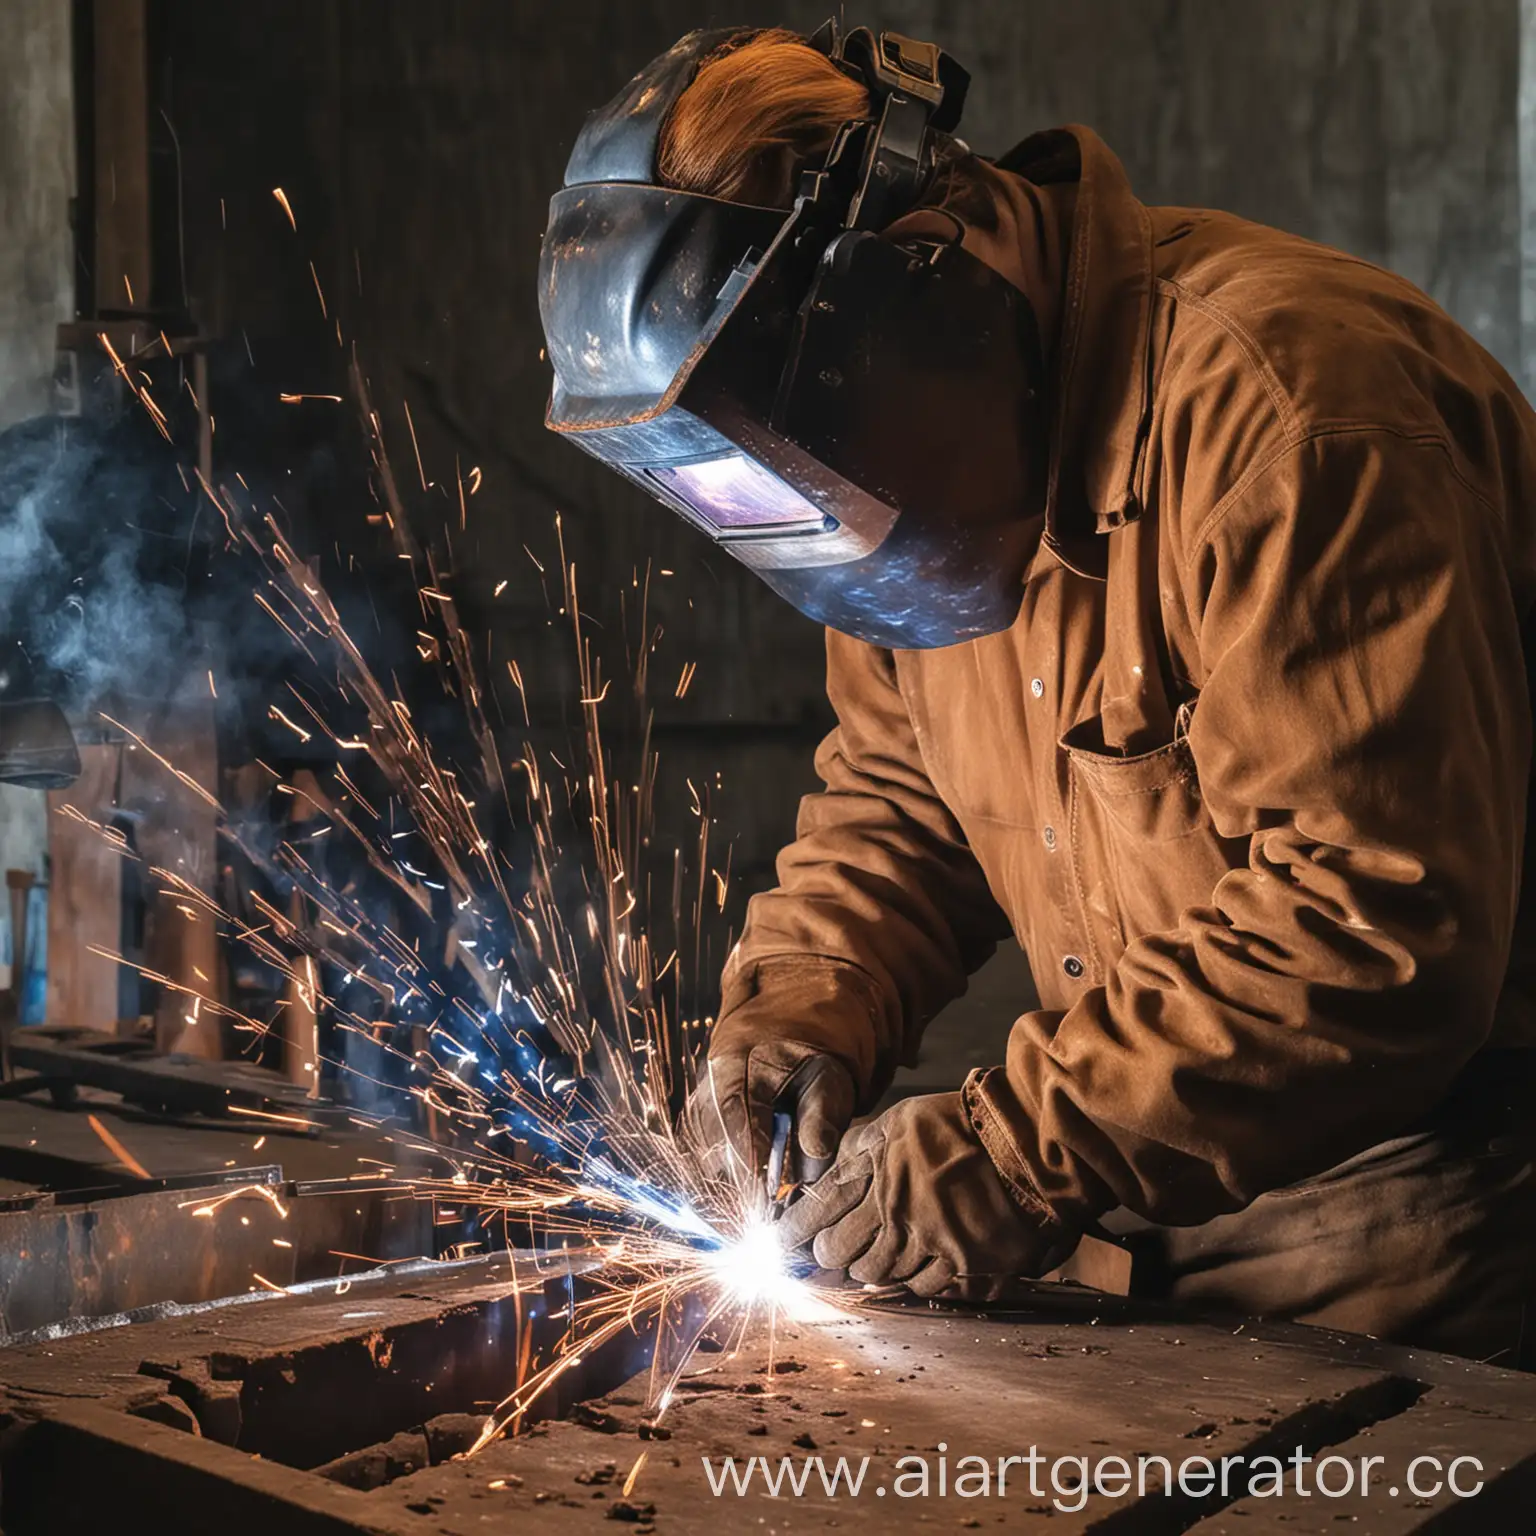 Safe-Welding-Practices-Protective-Gear-and-Proper-Ventilation